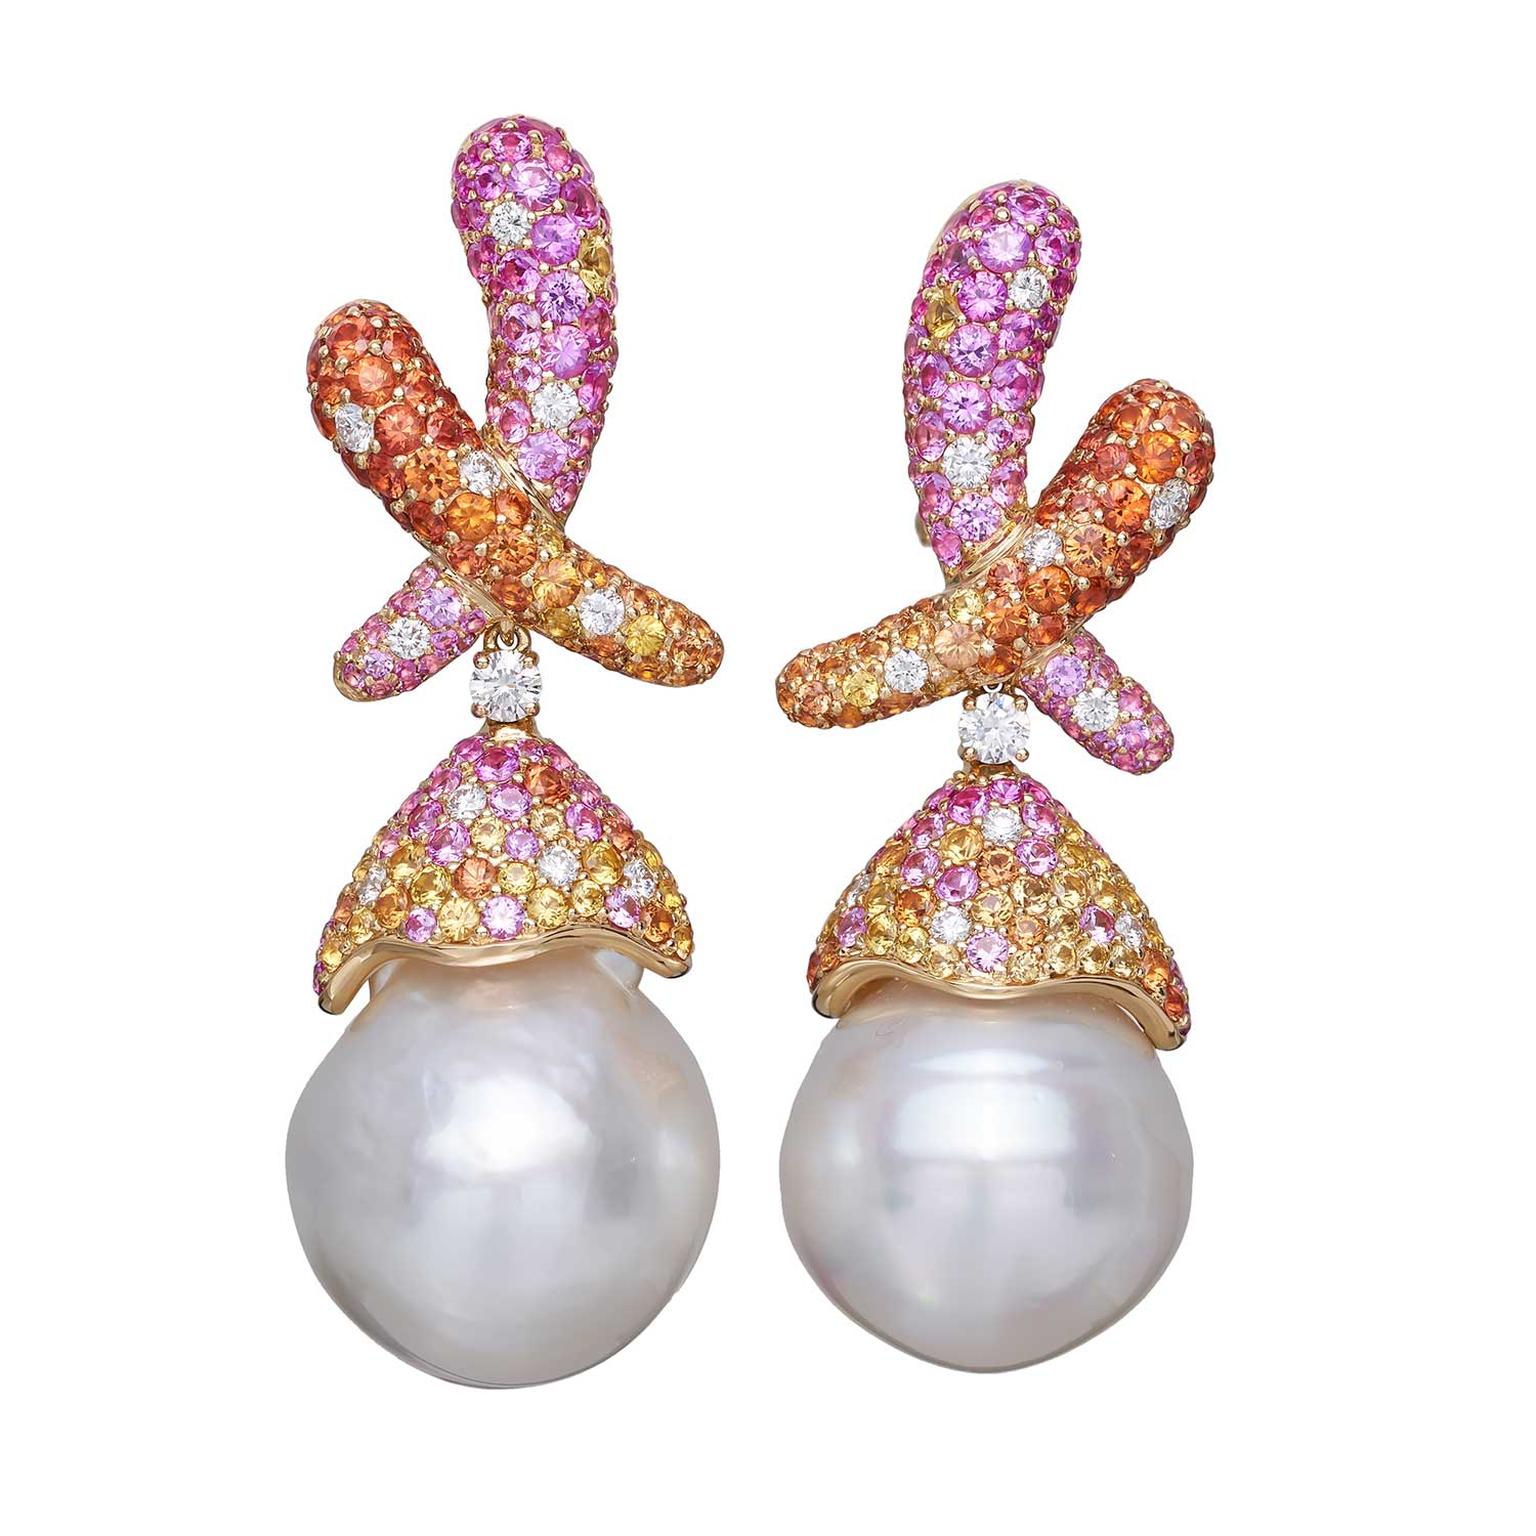 Margot McKinney Kiss earrings with pink, yellow and orange sapphires and diamonds with detachable Australian South Sea pearl drops